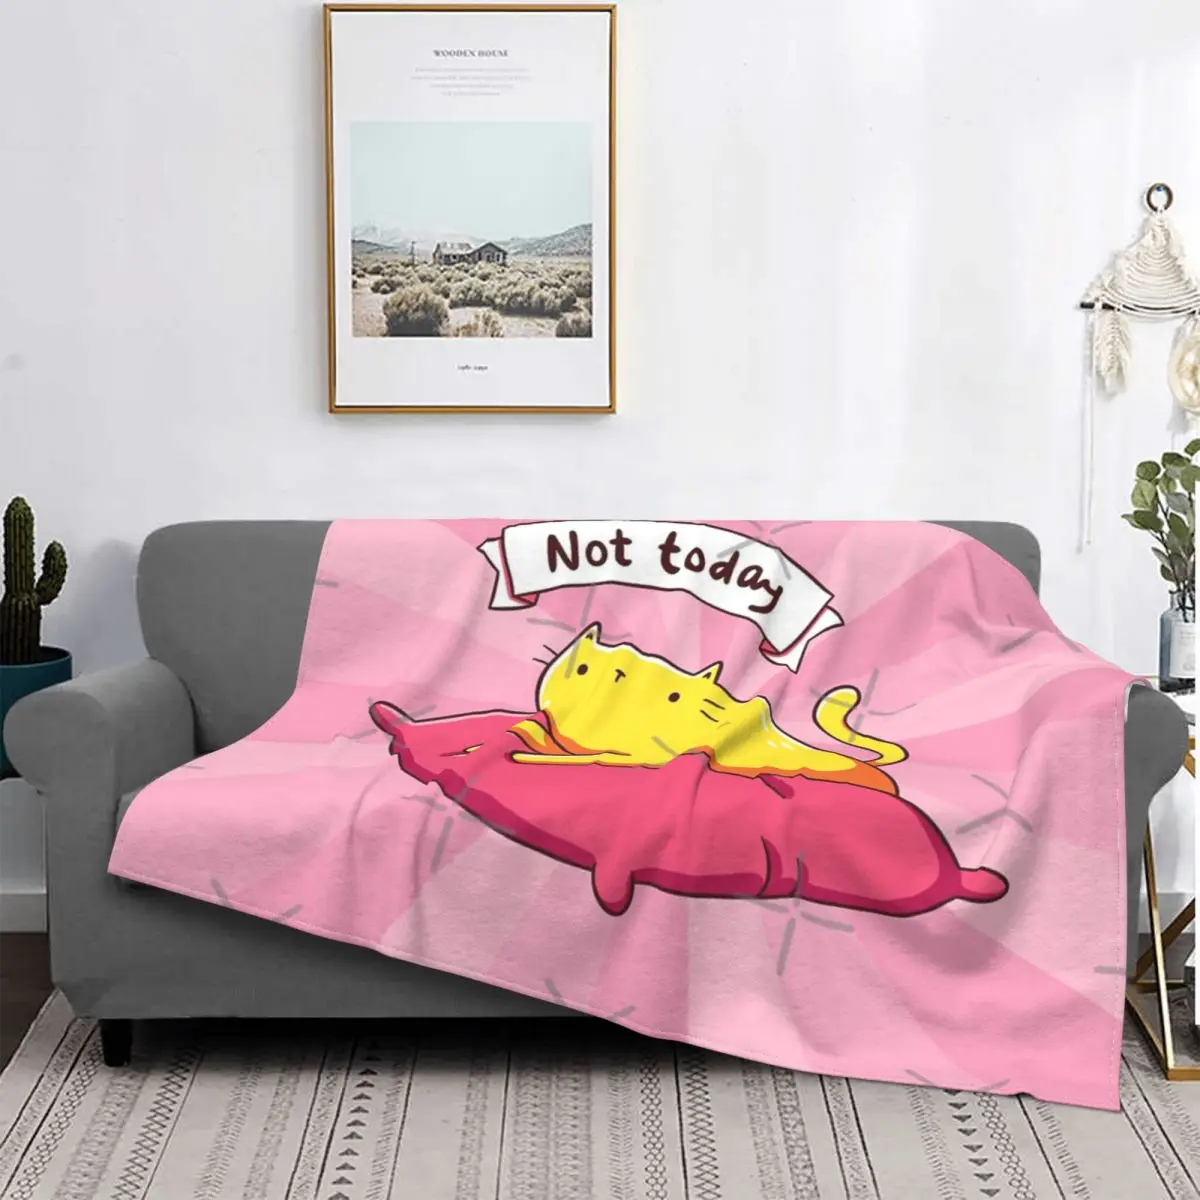 

Cute Lazy Cat Not Today Meme Blanket Bedspread Bed Plaid Blankets Fluffy Plaid Hooded Blanket Plaids And Covers